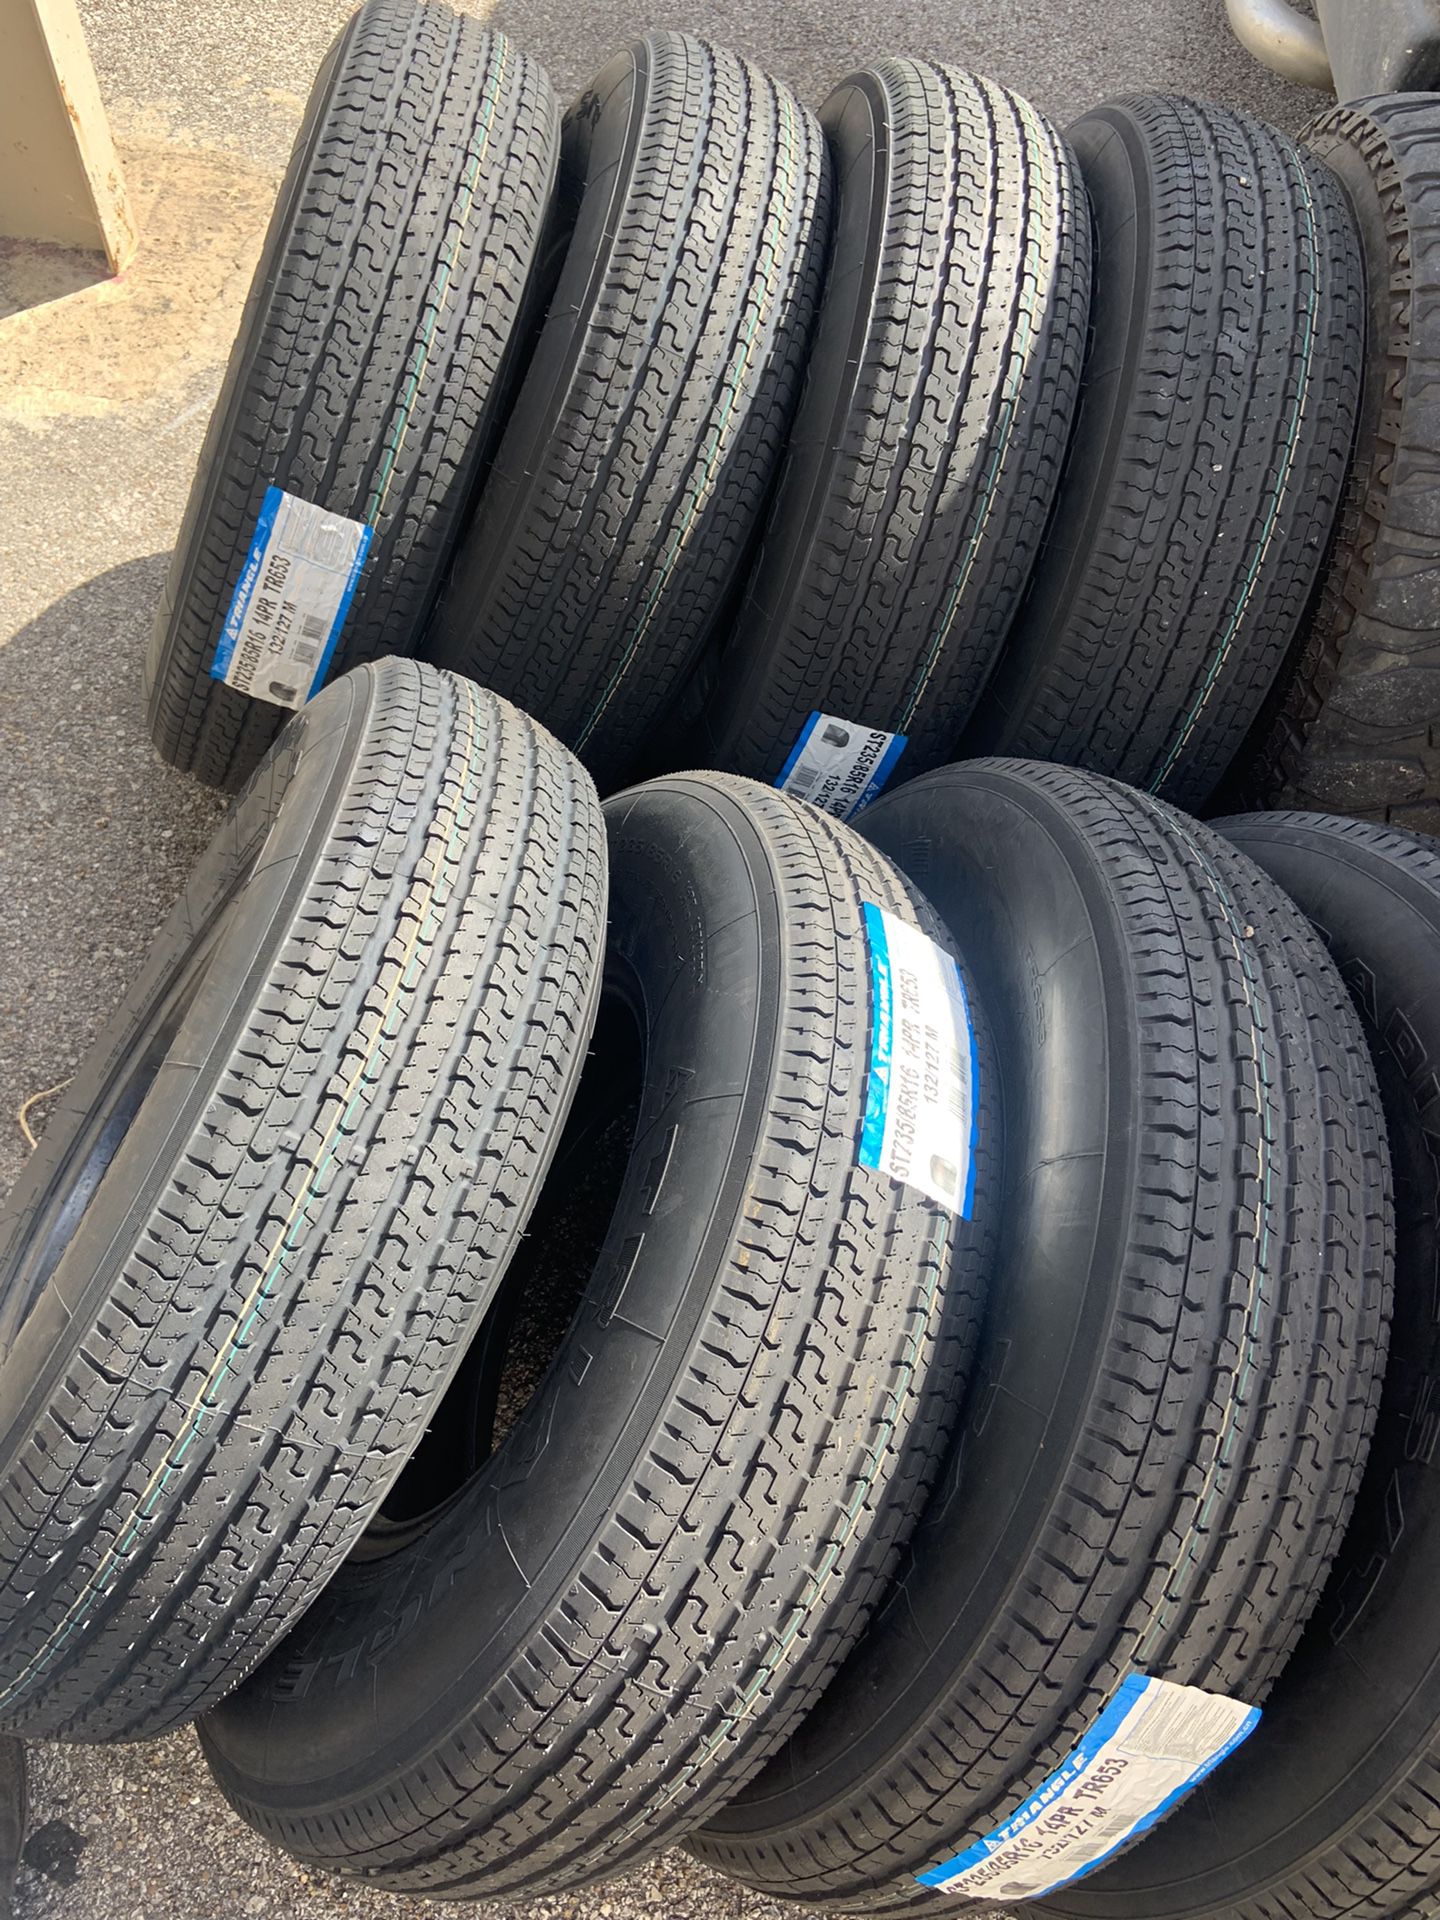 St235/85r16  Trailer Tires 14  Ply 